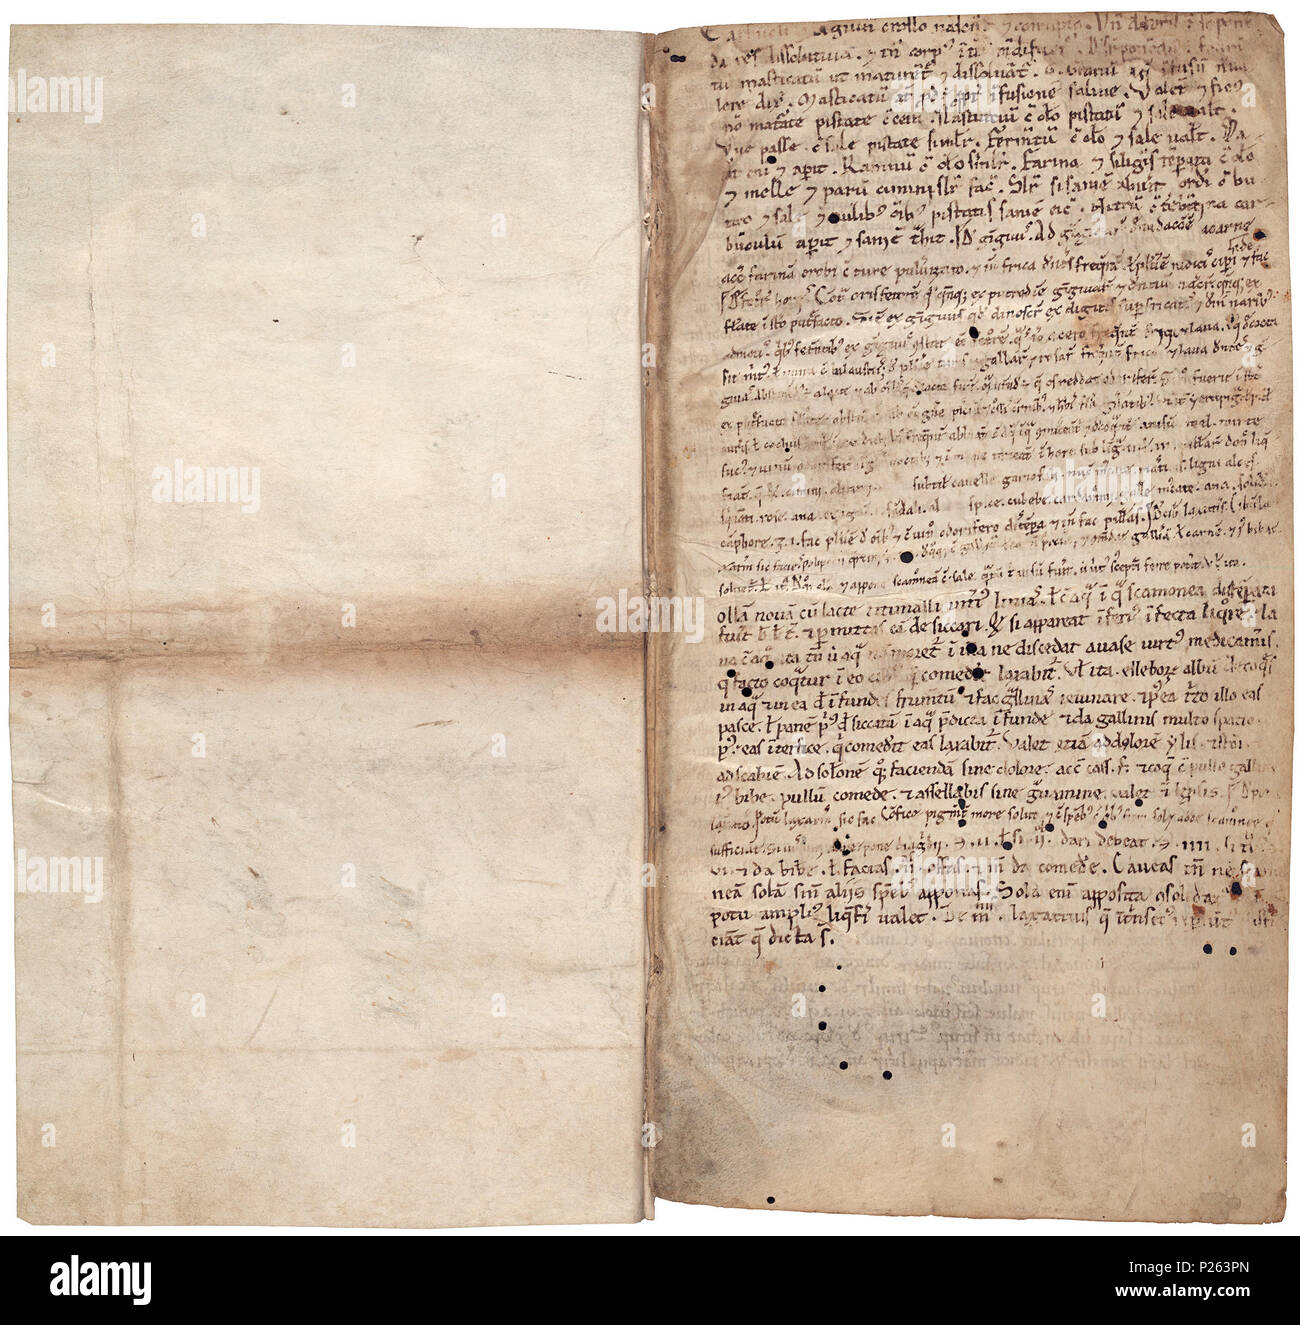 . Pantegni pars prima theorica (lib. I-X) - folios ii (left) and iii (right)  .  Lefthand side folio ii; righthand side folio iii from a copy of the Liber pantegni This is the earliest known copy (prior to 1086) of the Liber pantegni, made at Monte Cassino under the supervision of Constantine the African It is dedicated to Abbot Desiderius of Monte Cassino (1027-1087), before he became Pope Victor III Read backgroud information in Dutch and in English . Trotula de Salerno (11th/12th century), Gilbertus Anglicus (ca. 1180-ca. 1250) and Johannes Egidius Zamorensis (ca. 1240-1320) 176 Liber pante Stock Photo